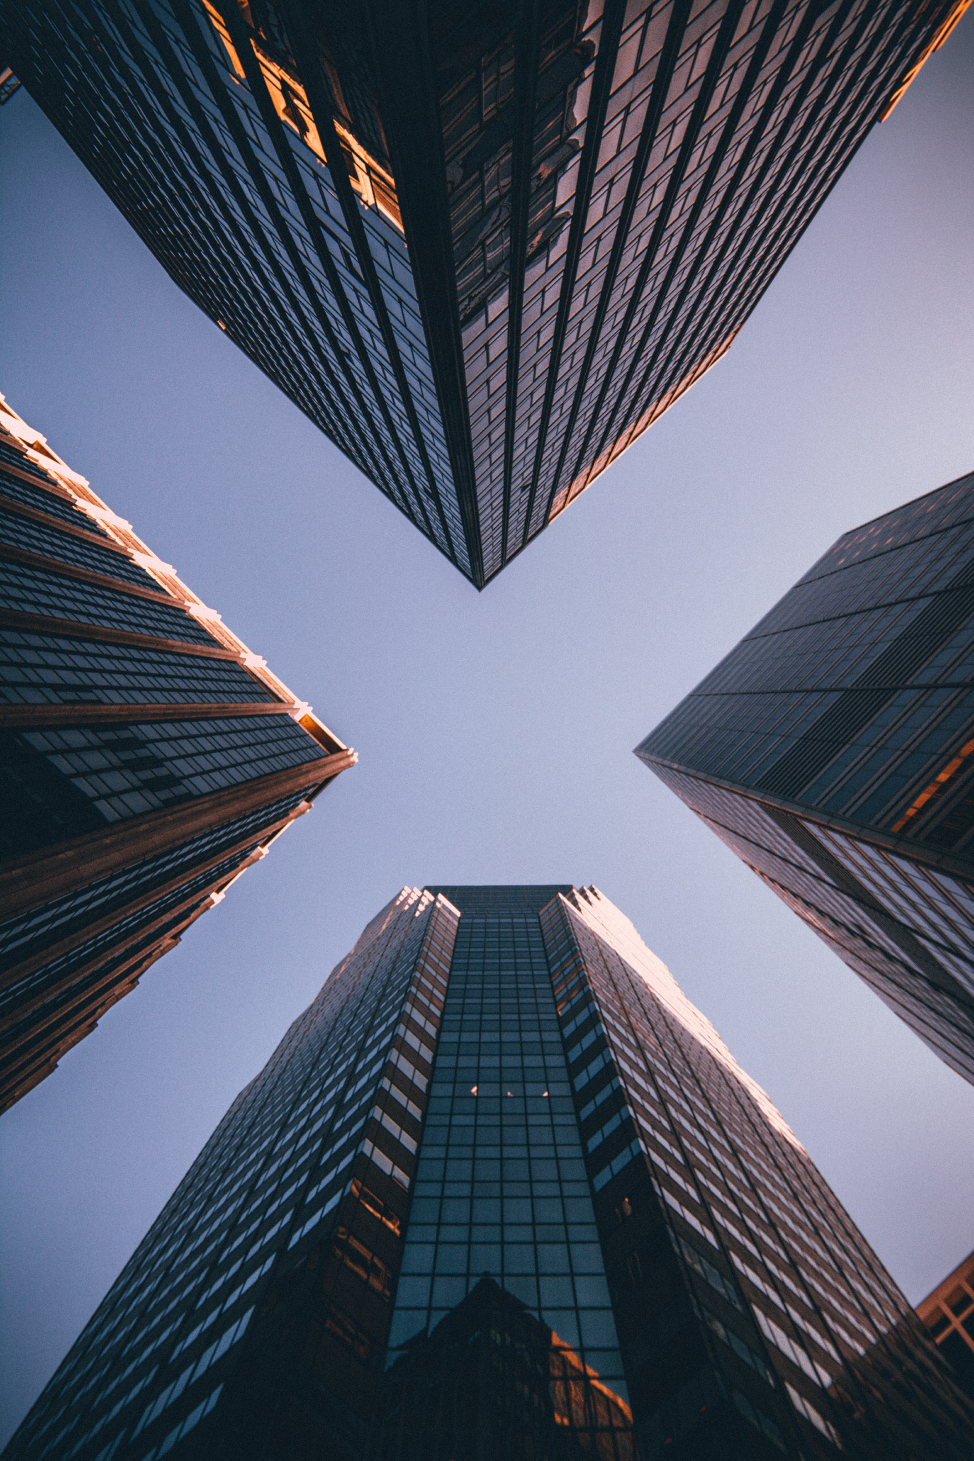 Looking up at the sky, with 4 skyscrapers on each side of the image